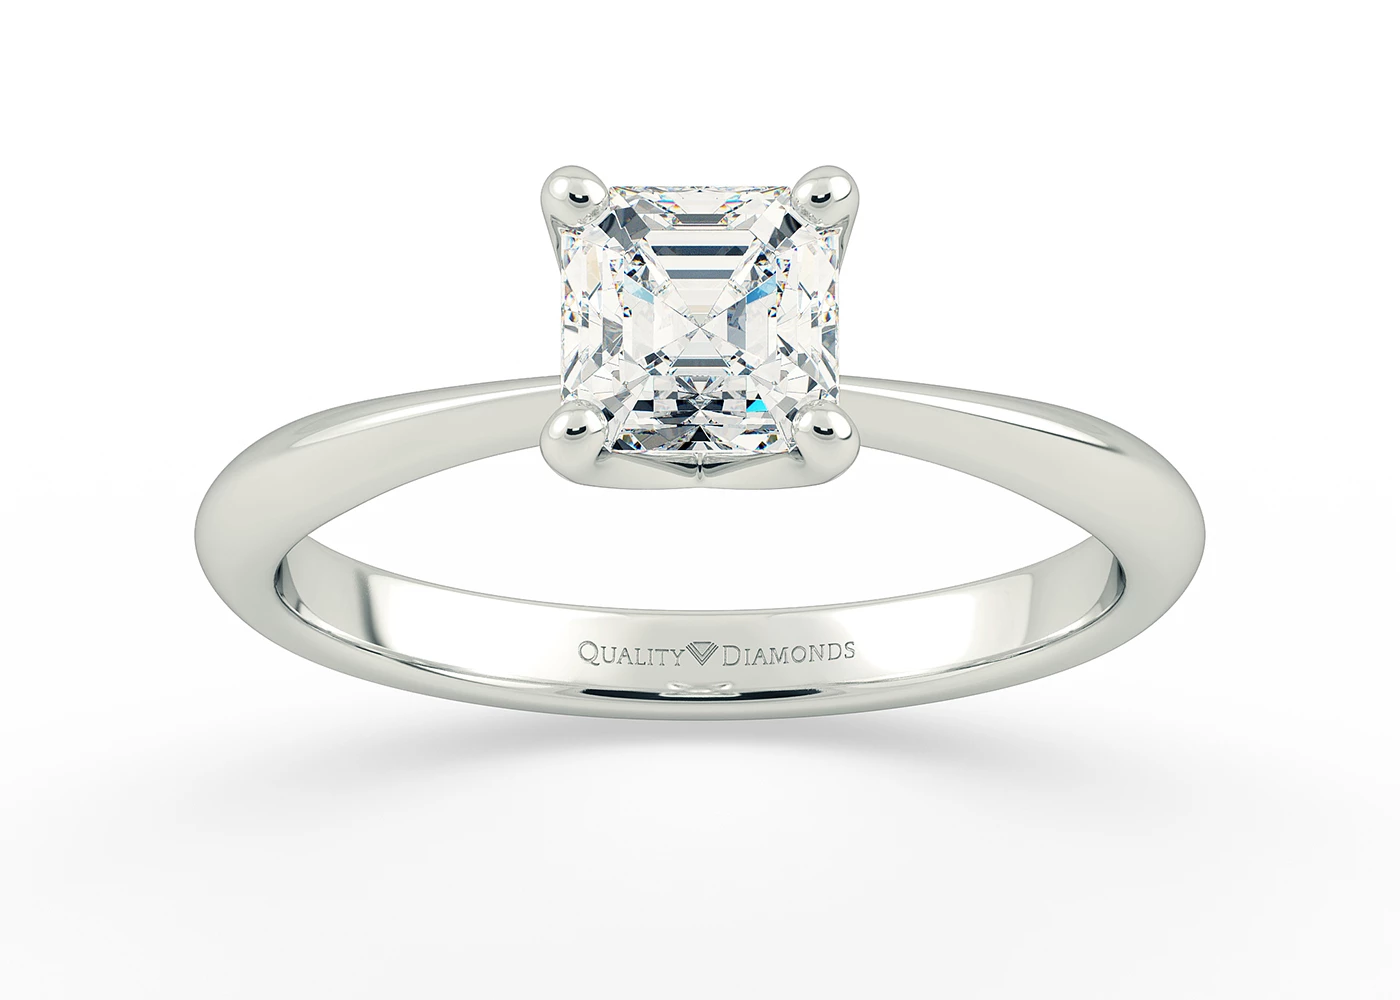 Two Carat Asscher Solitaire Diamond Engagement Ring in 9K White Gold